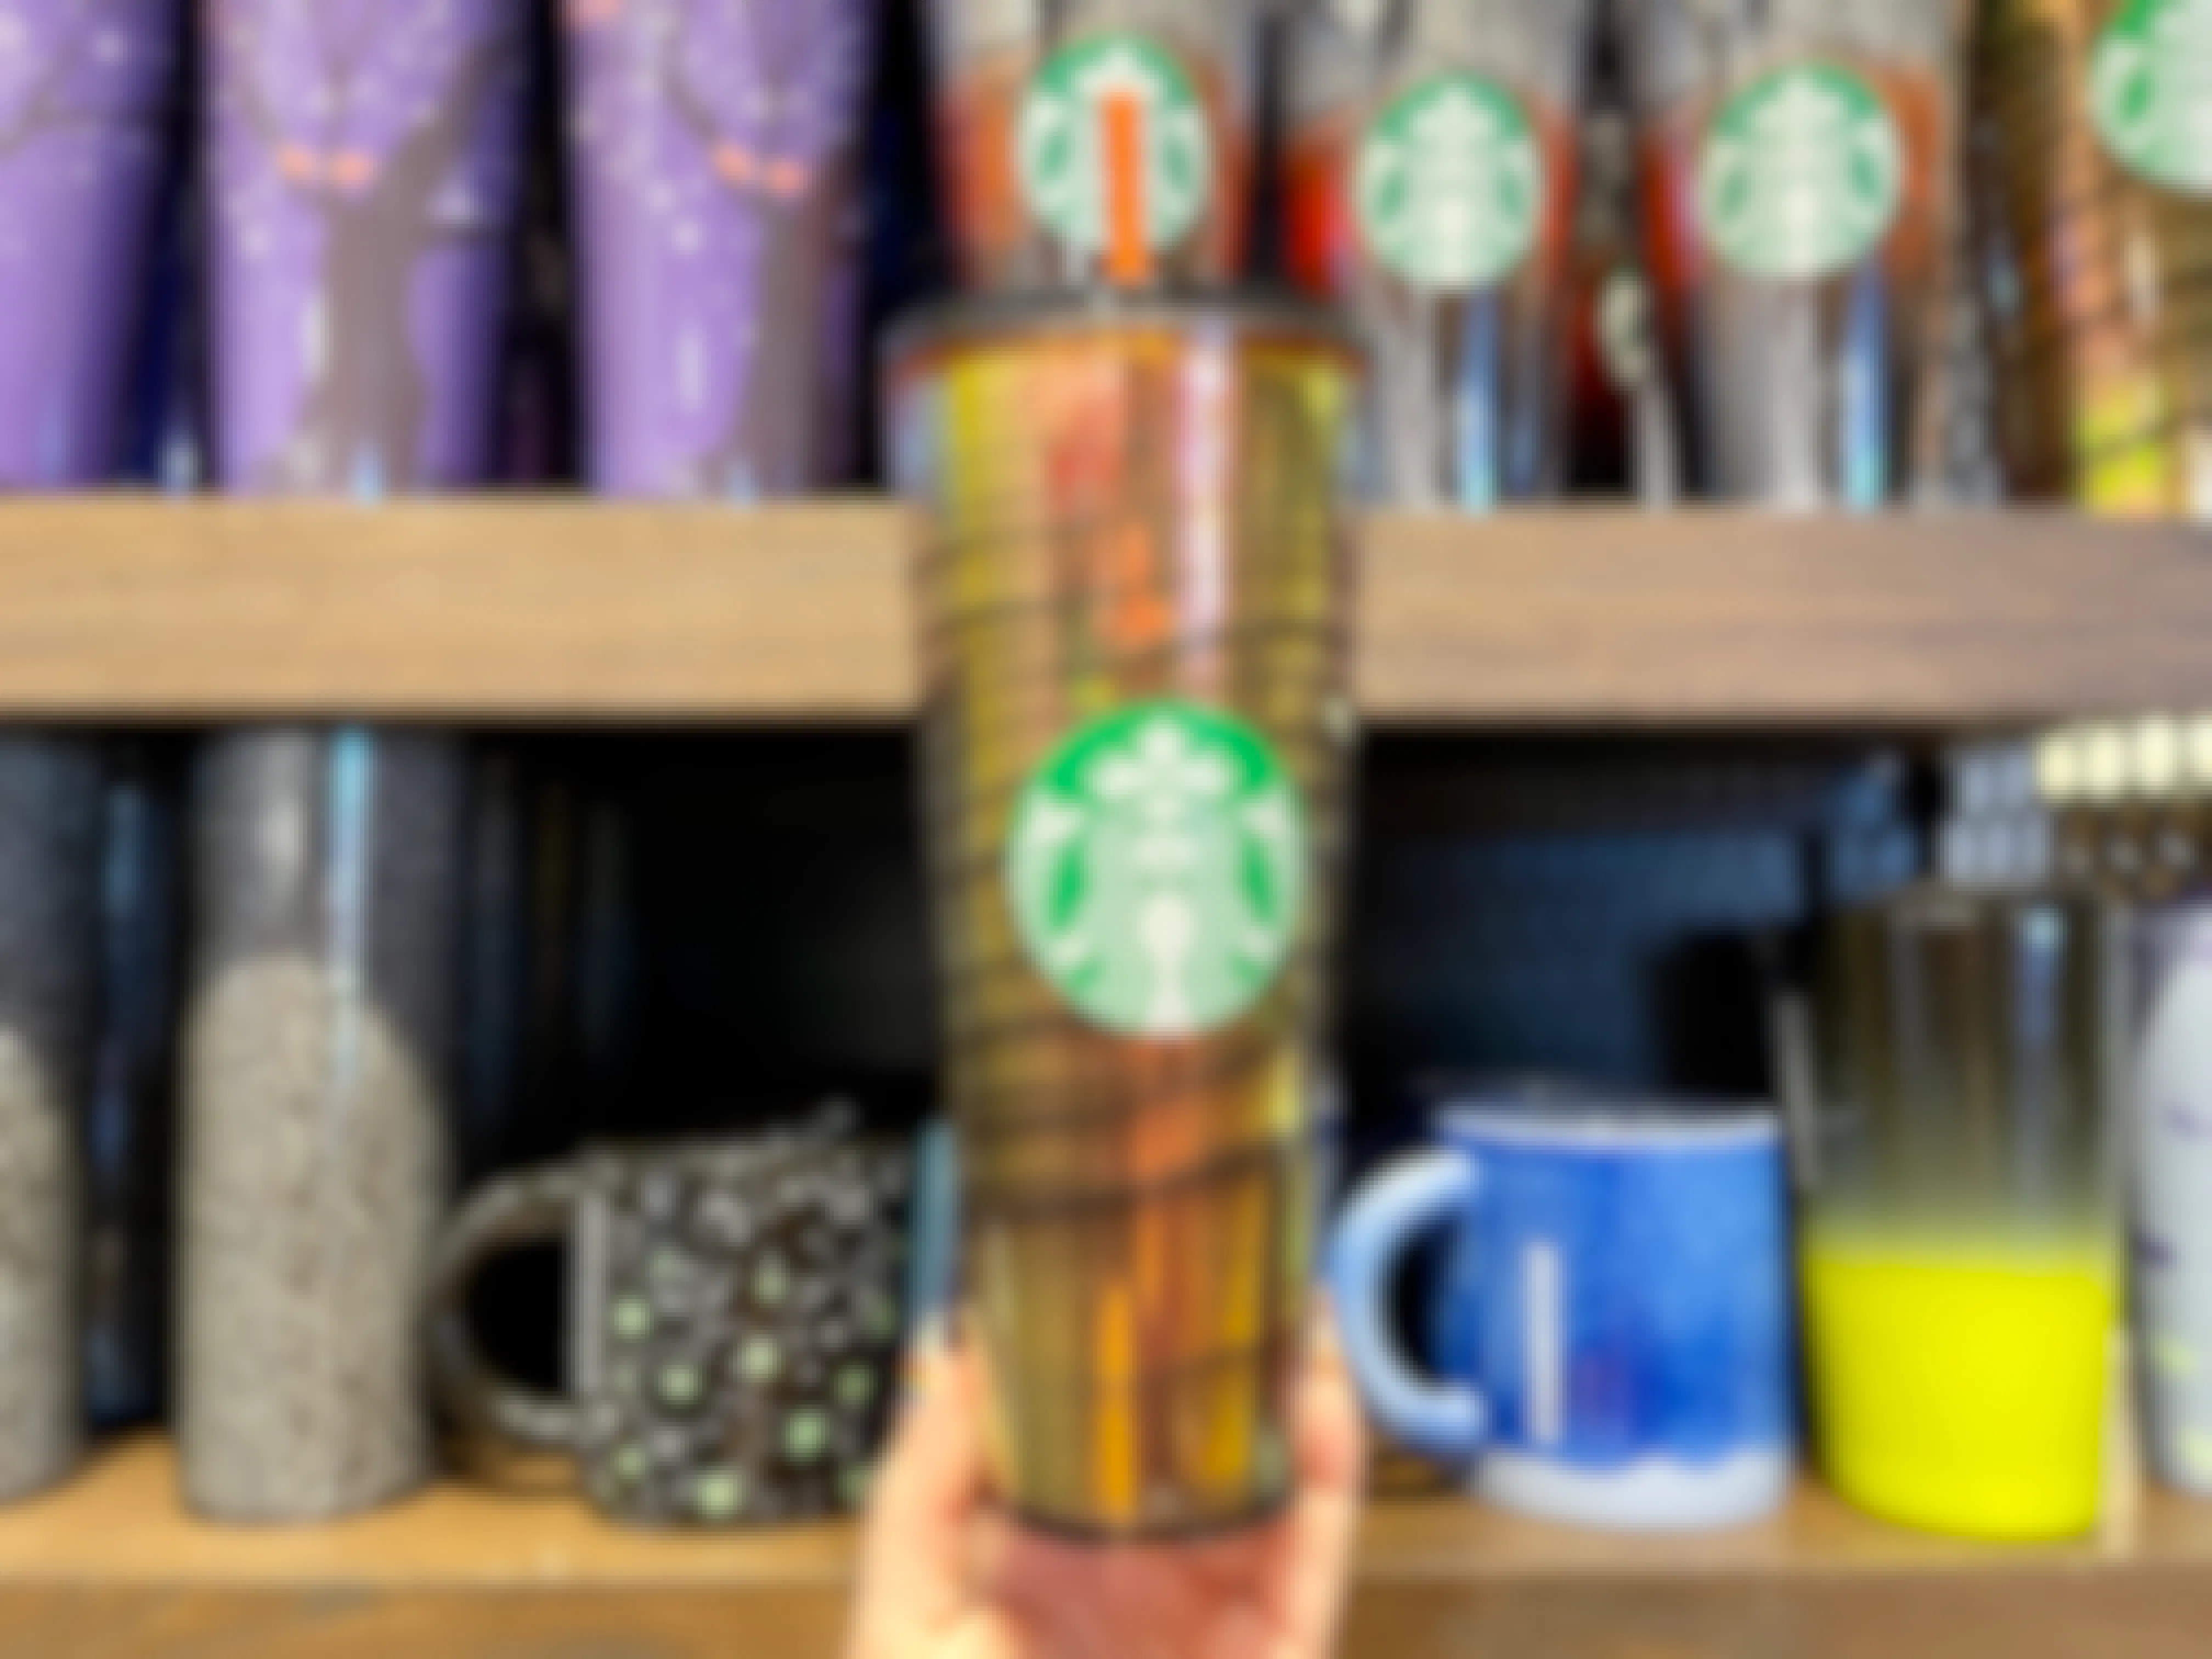 A person holding a Starbucks cup from the new Halloween release in front of a shelf of other Starbucks cups.